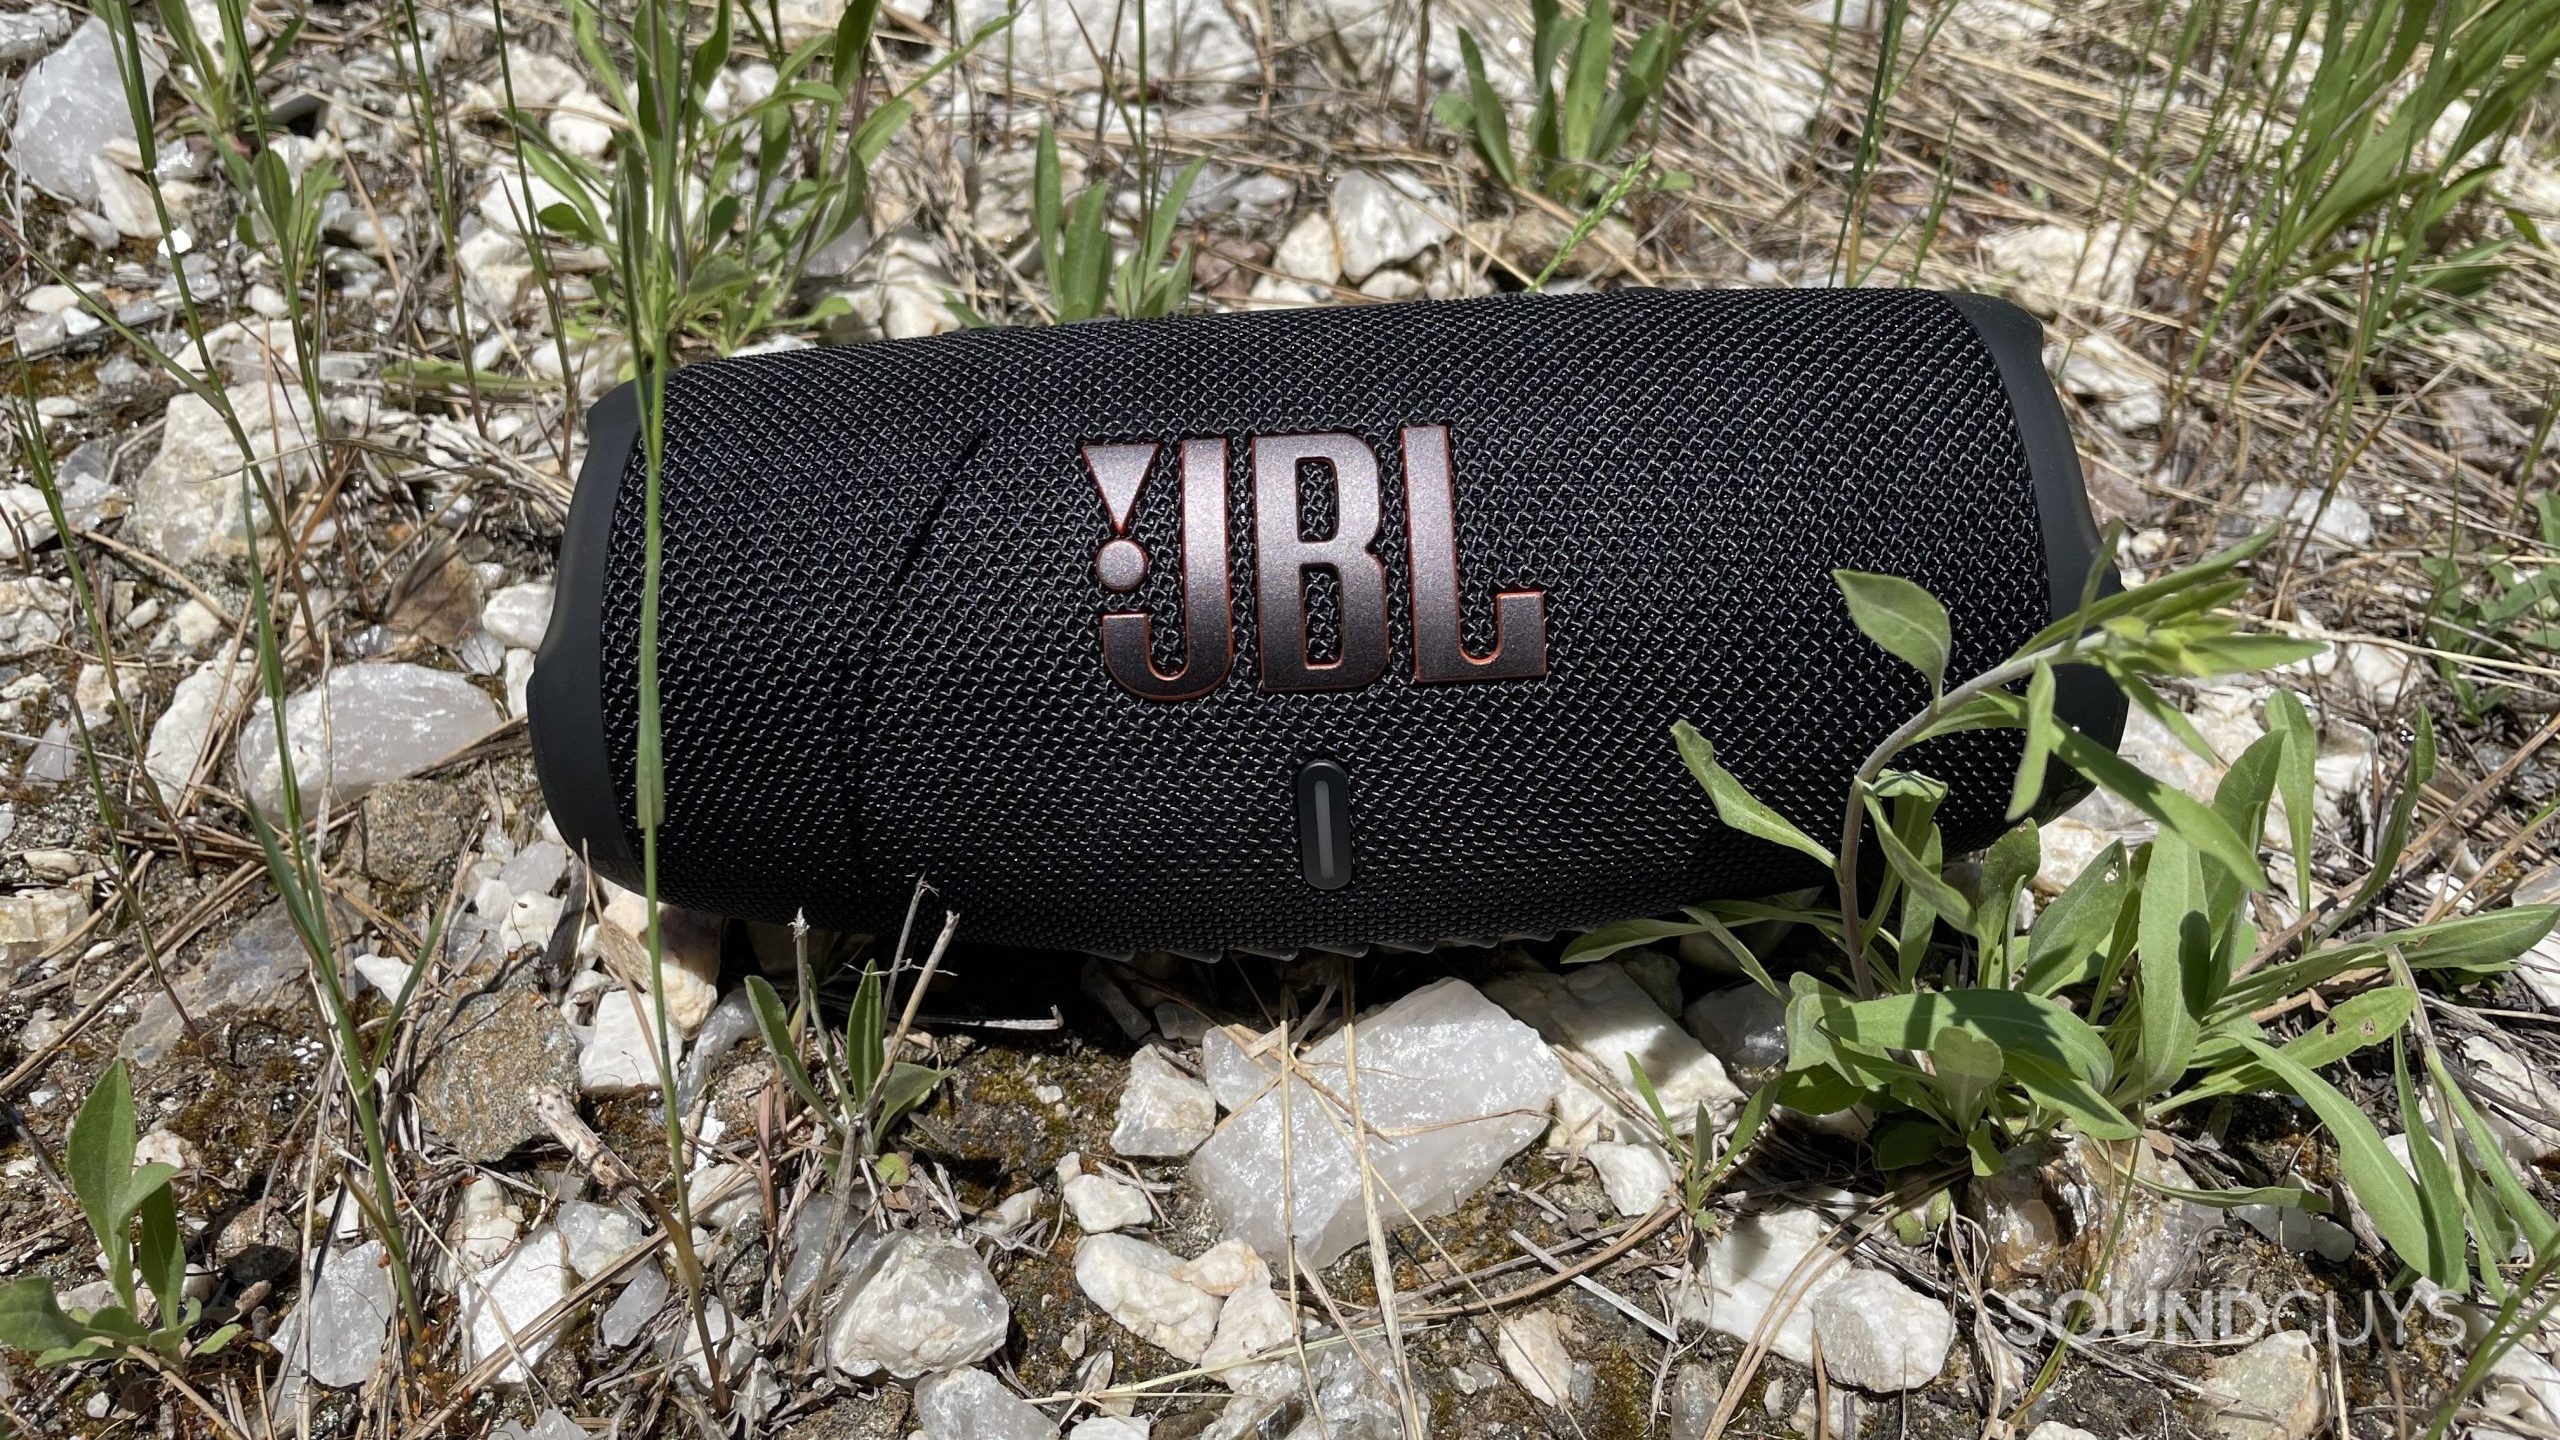 JBL Charge 5 resting on rocks and grass.